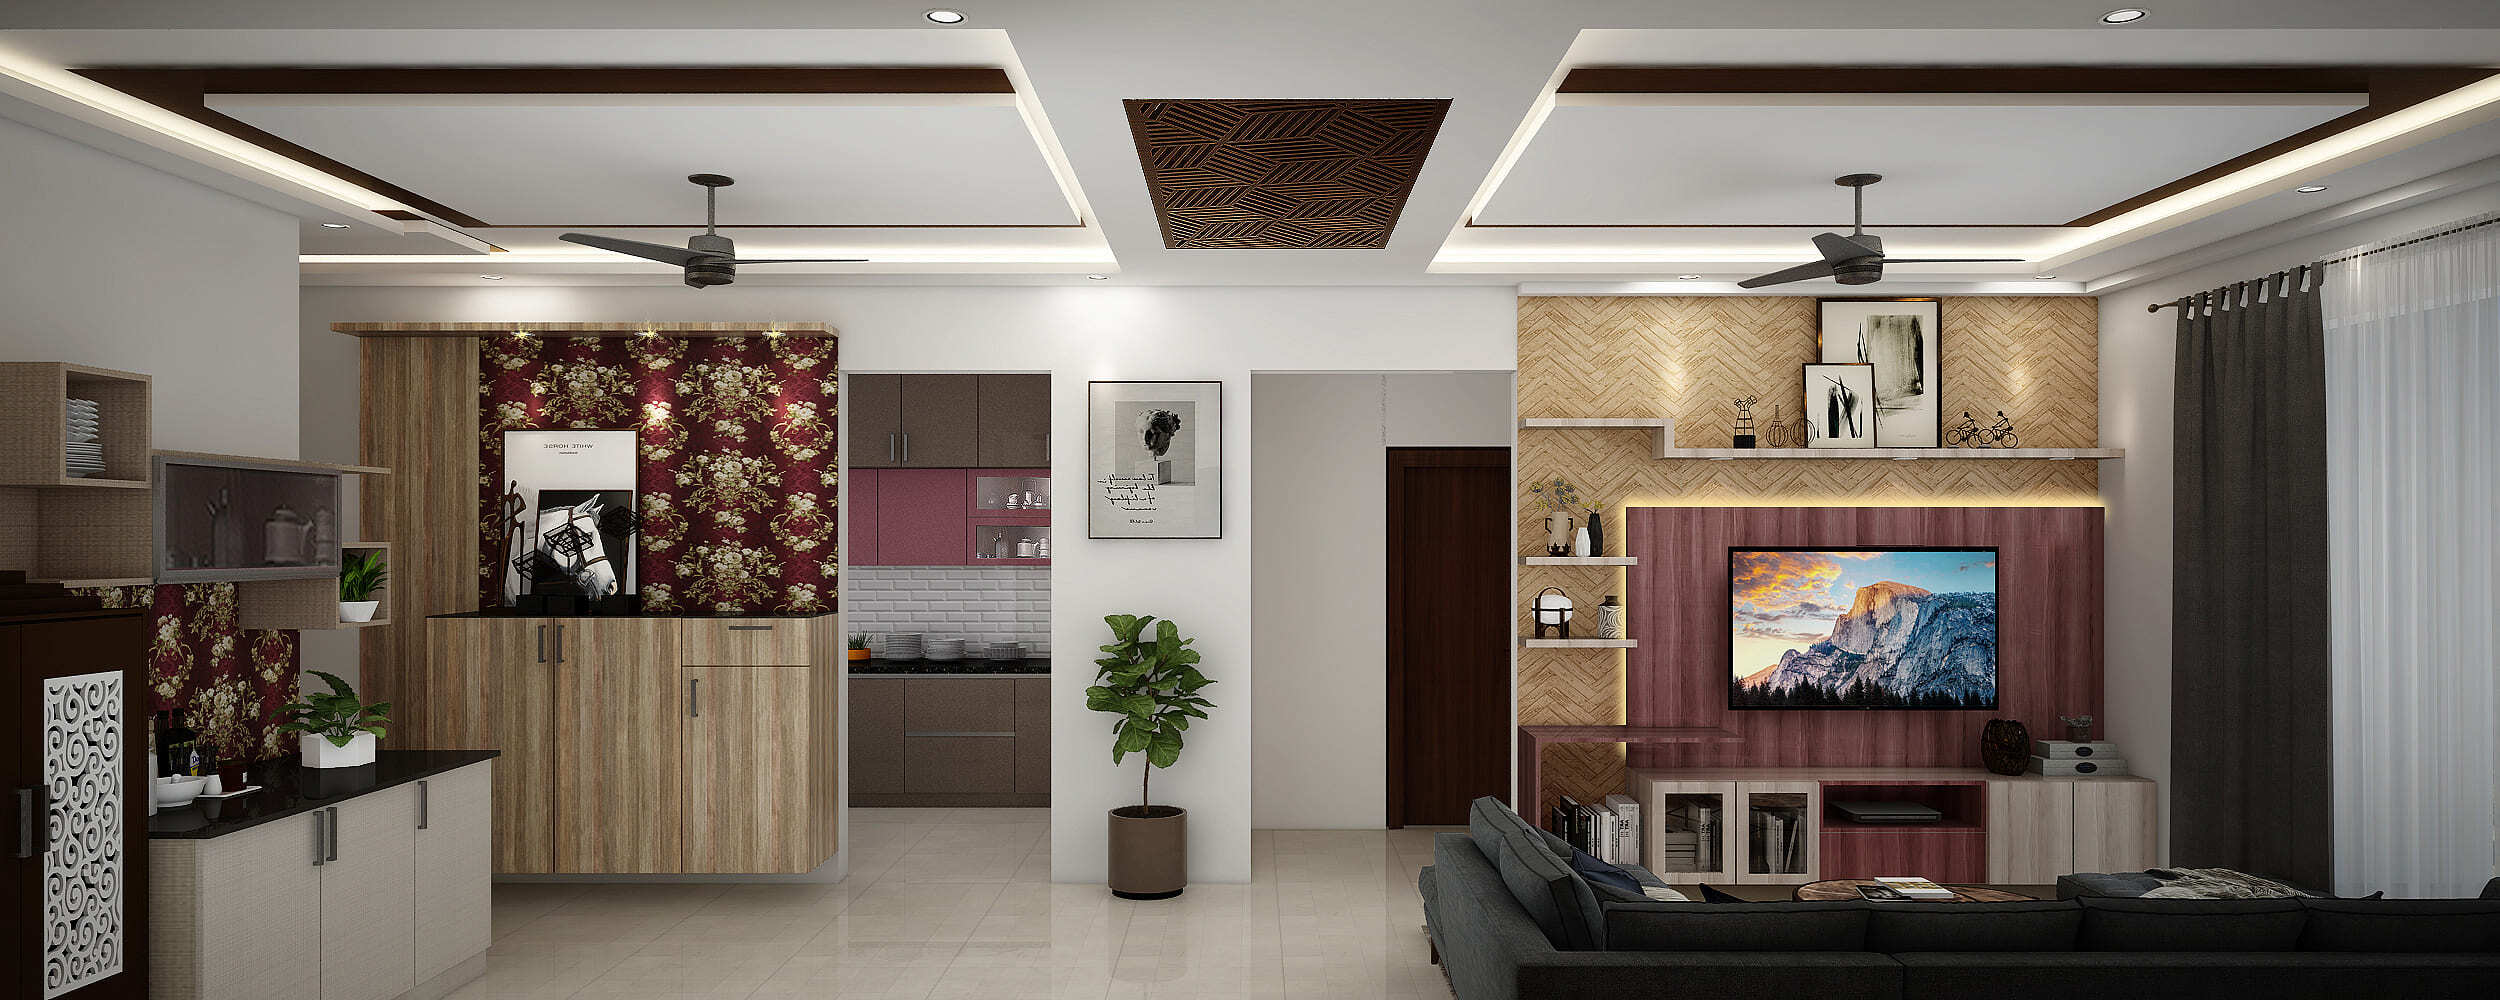 LIGHTING AND FALSE CEILING IDEAS FOR YOUR LIVING ROOM